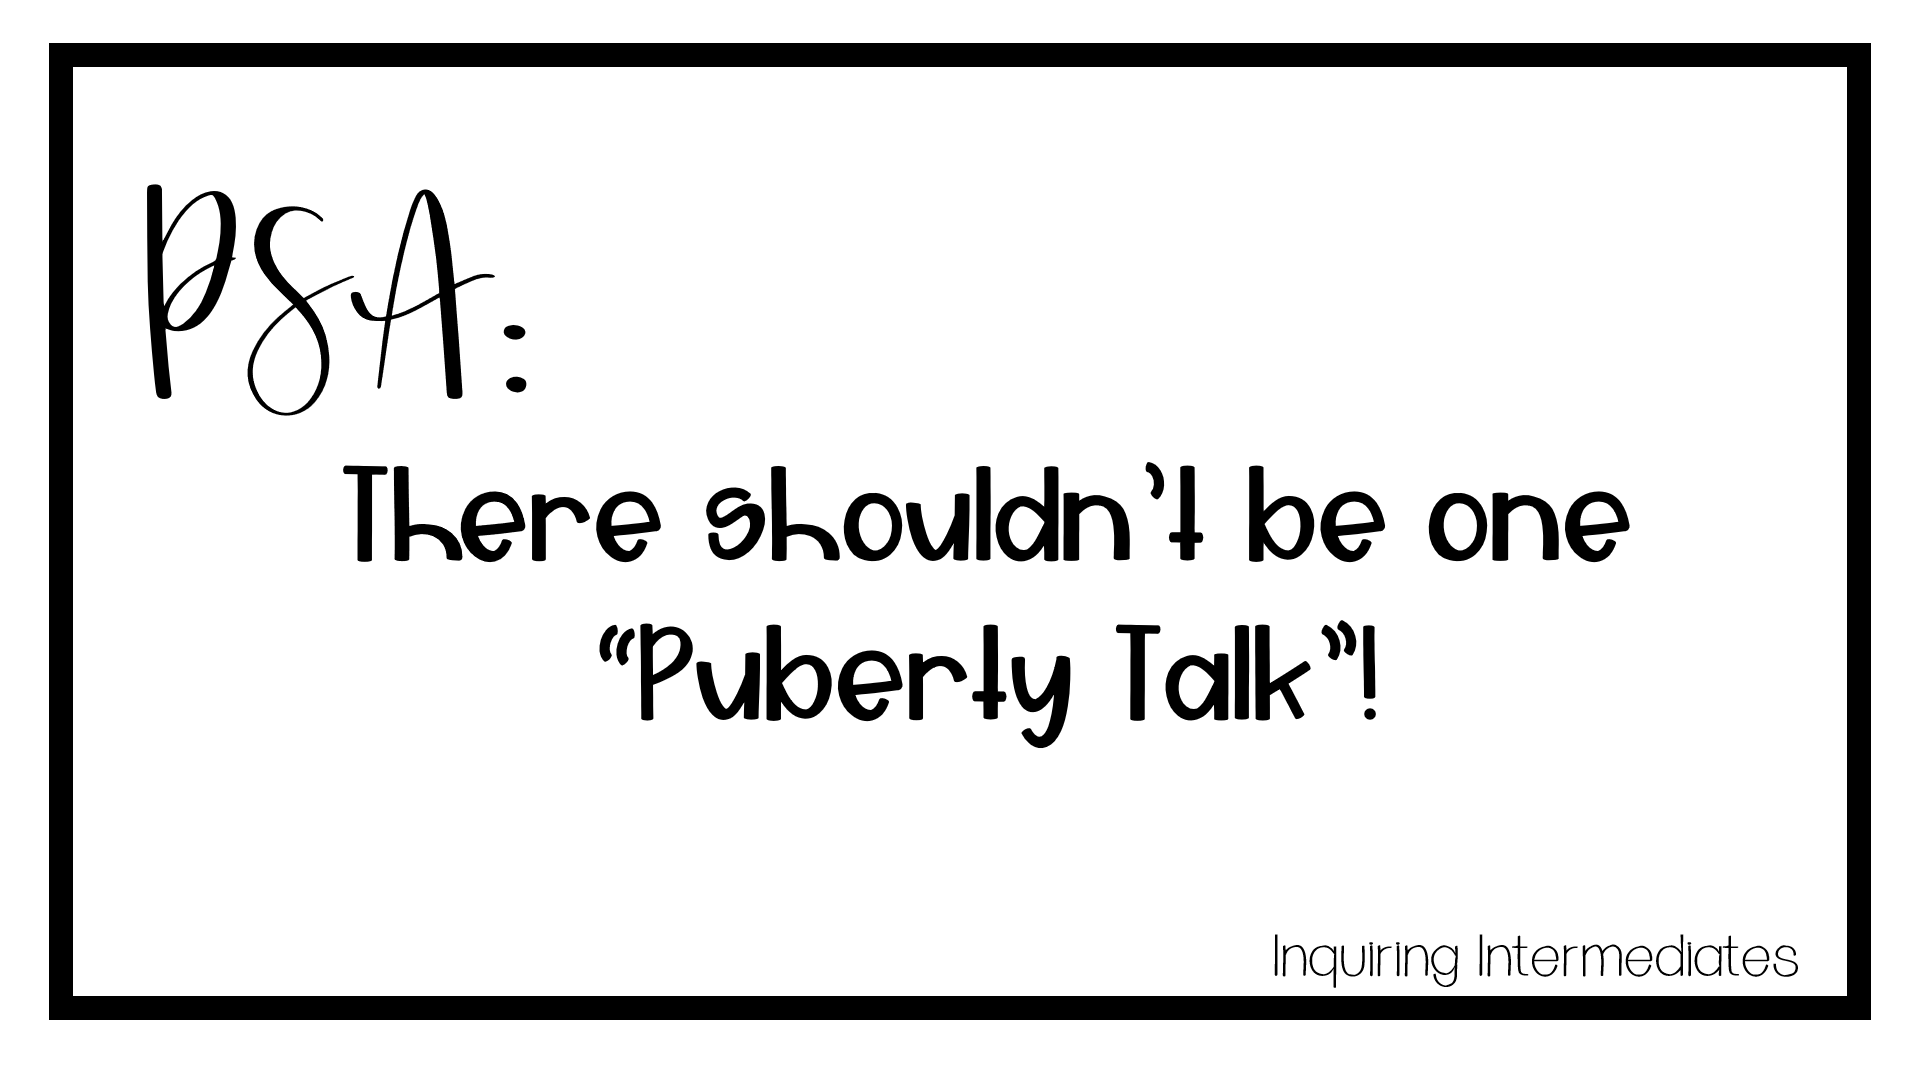 PSA: There shouldn't be one "puberty talk"